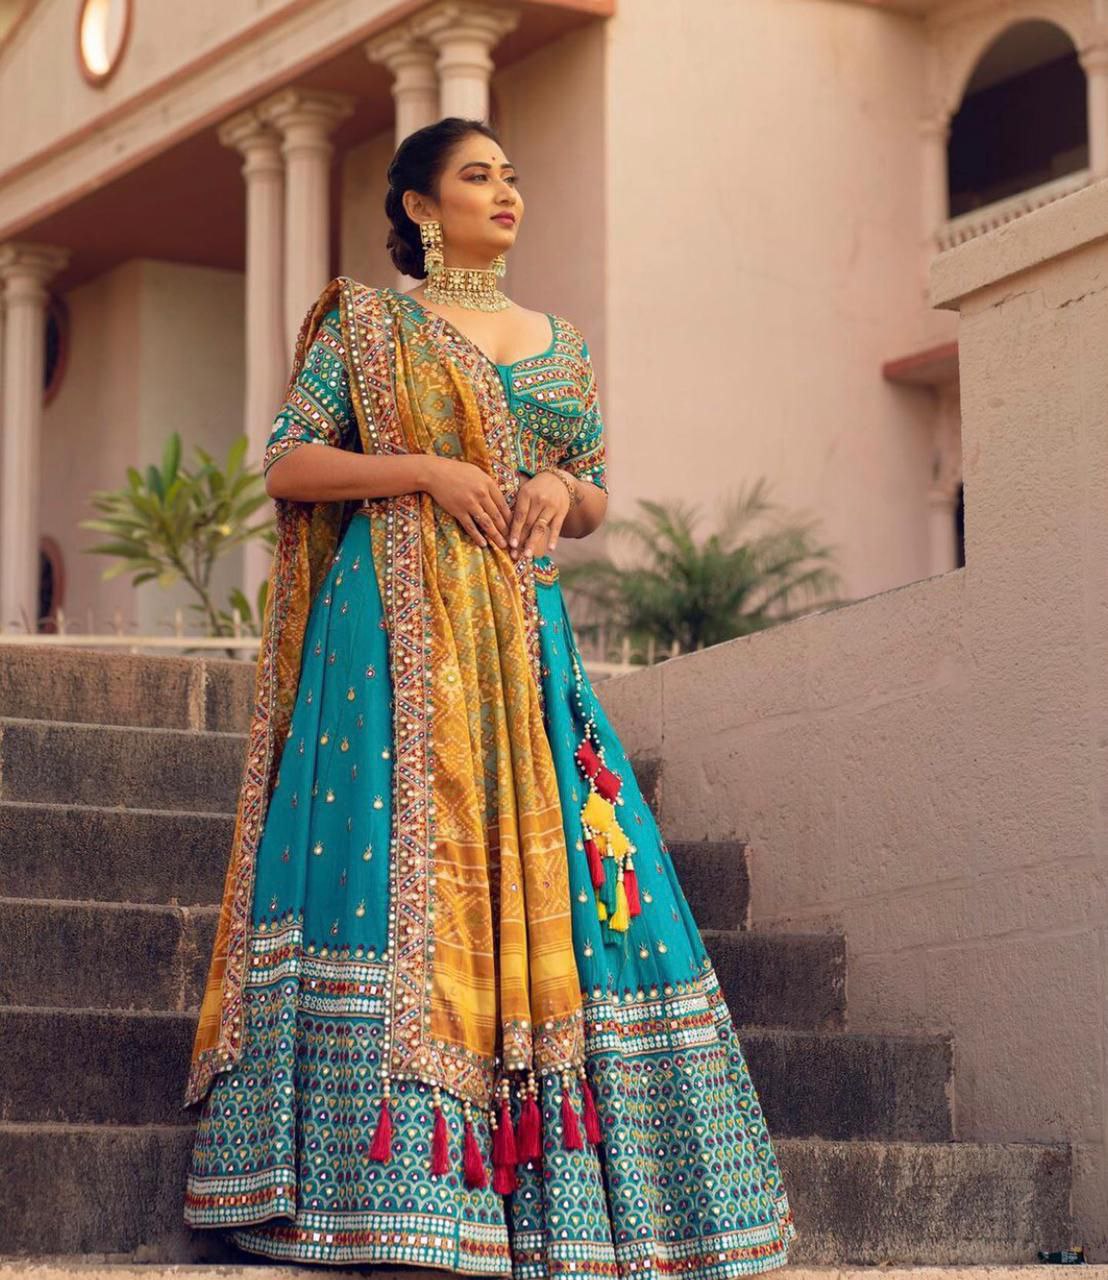 Control the cancan! Reasons NOT to overdo this in your Lehenga | Bridal  dress design, Indian bridal, Indian wedding outfits